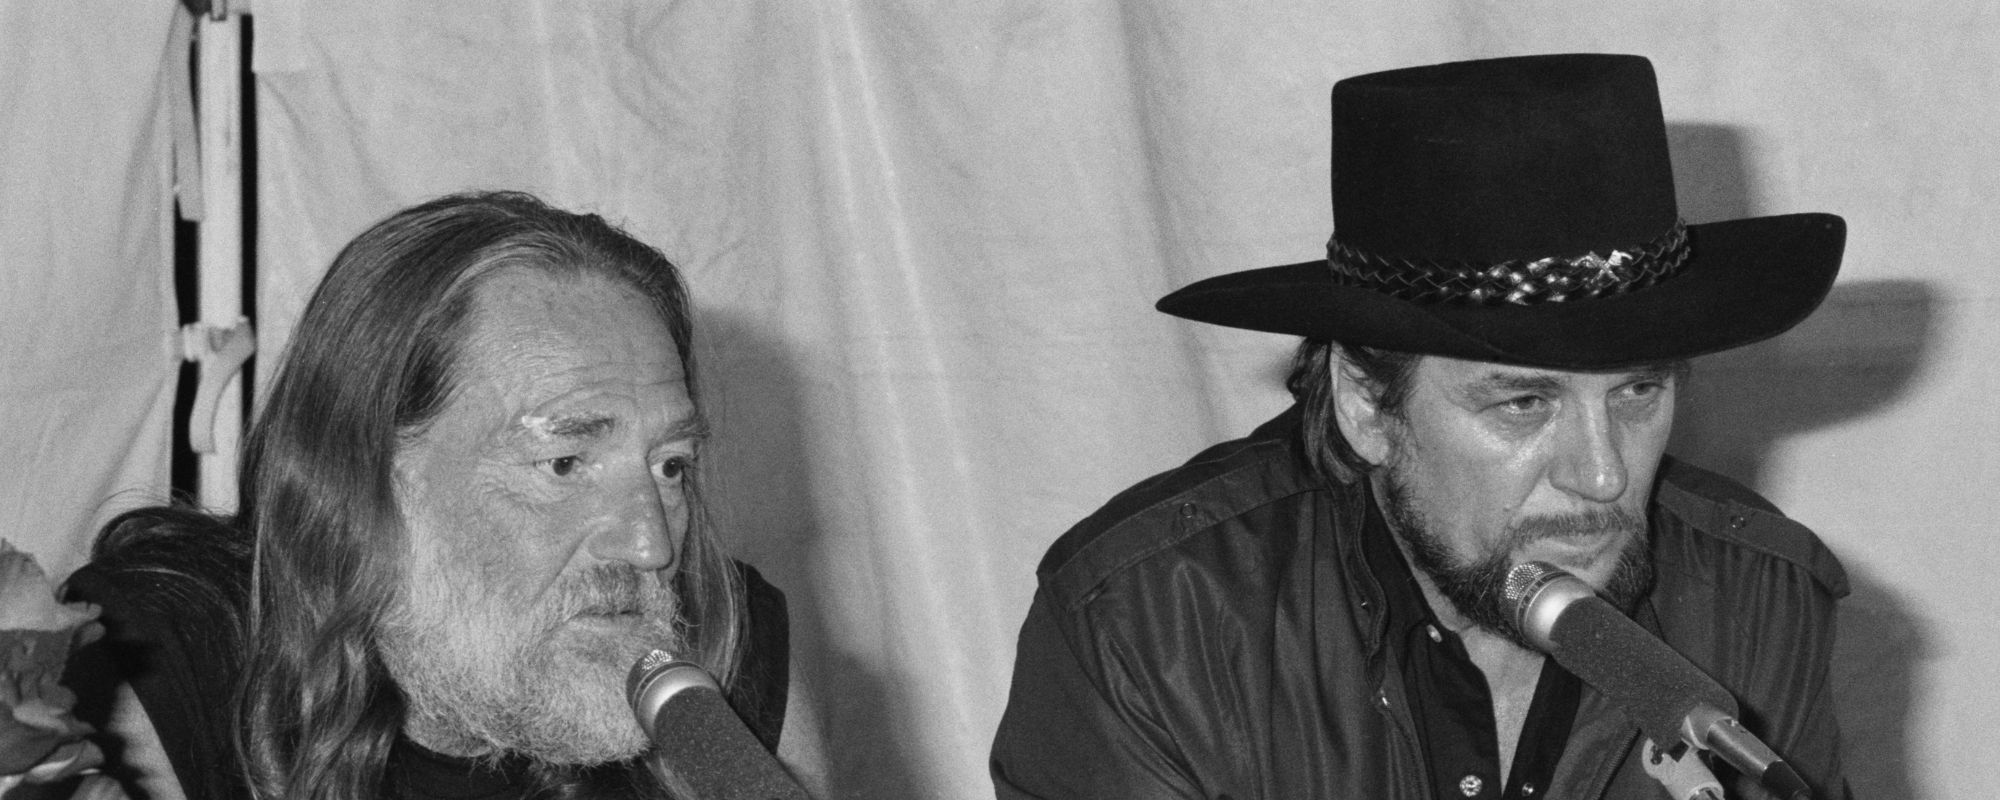 Willie Nelson Says Waylon Jennings Was Disappointed When He Agreed “Bob Wills Is Still the King”